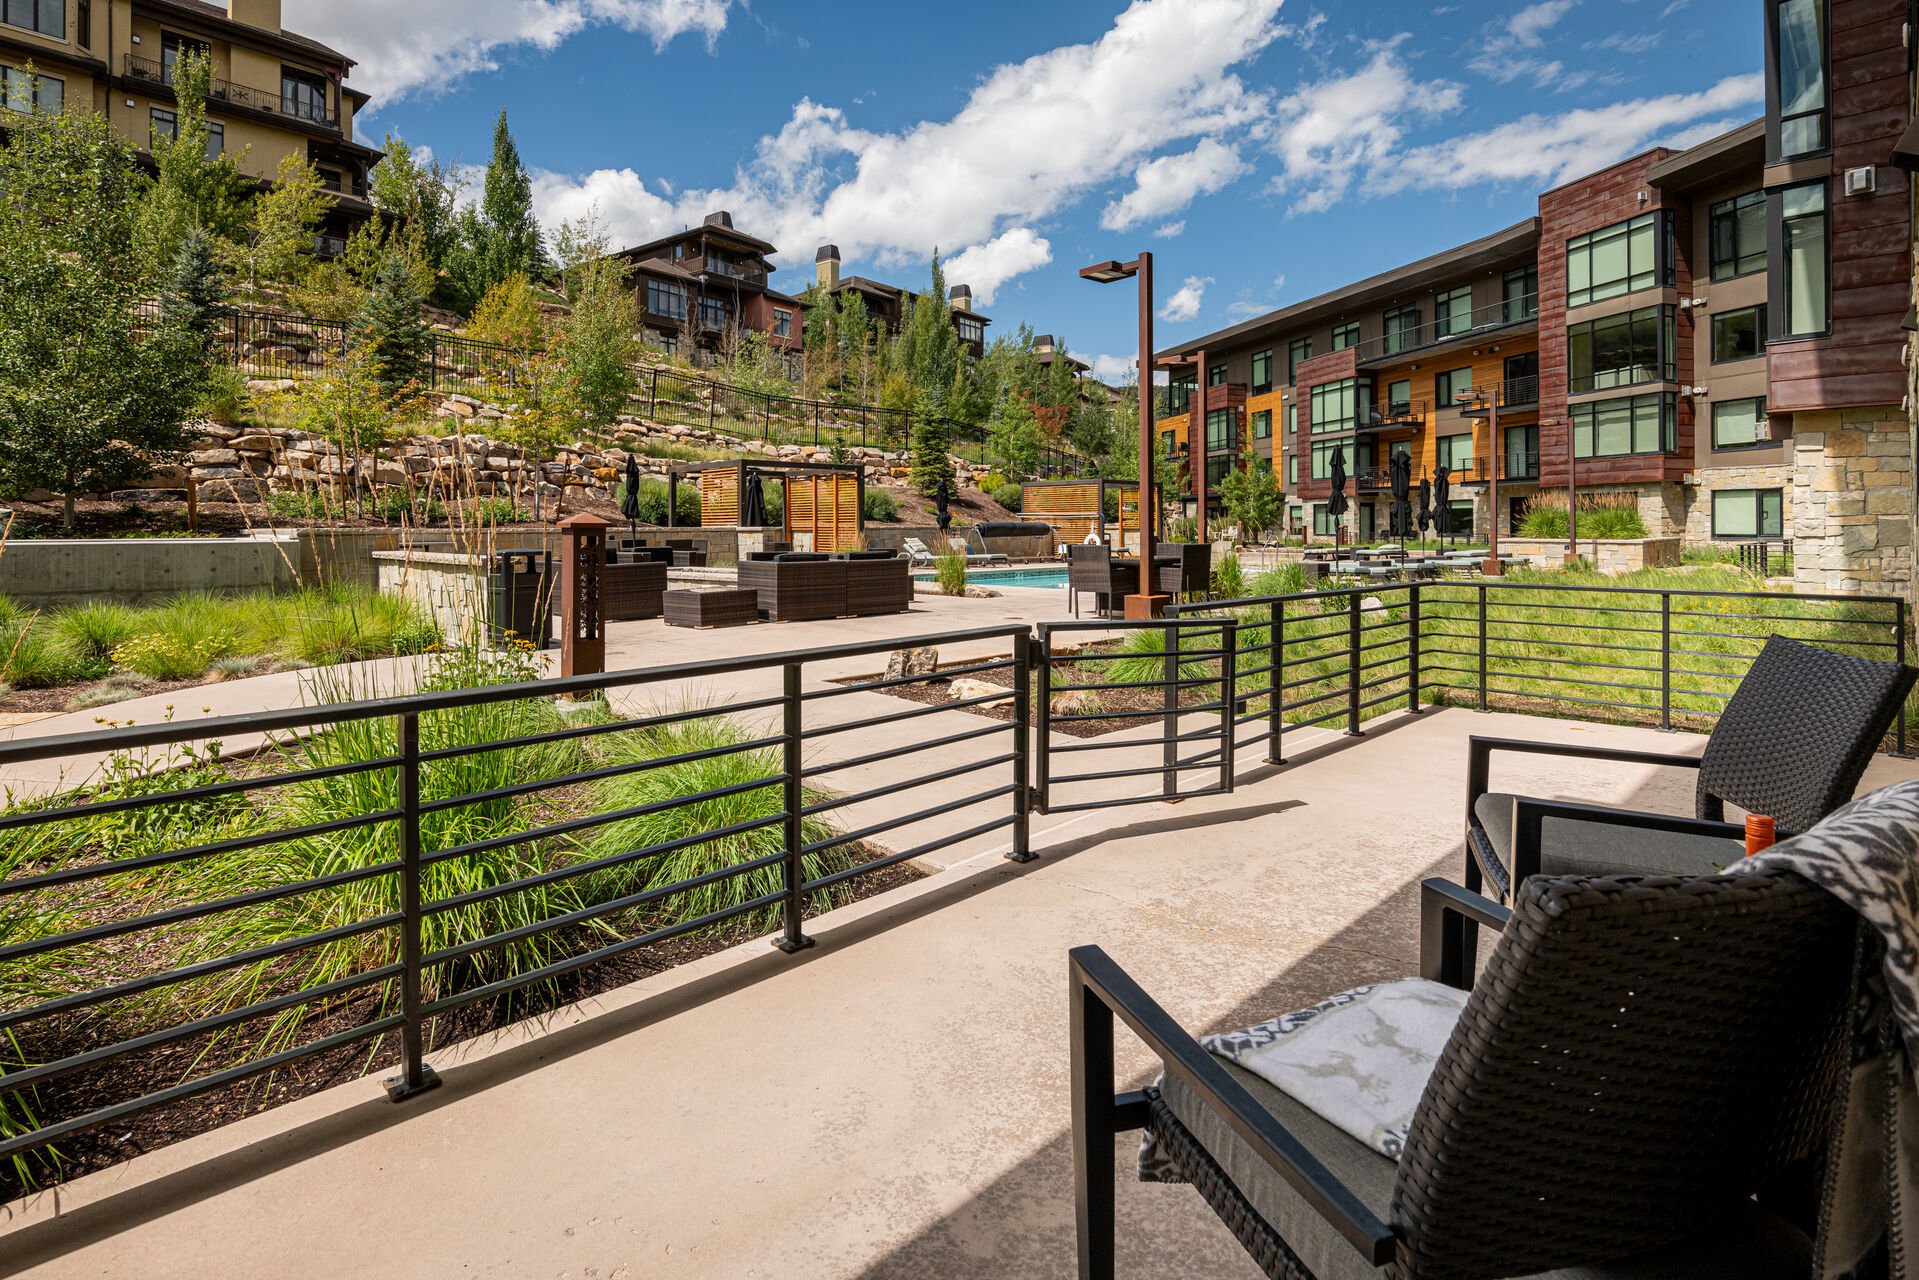 Lift 301's private patio features direct access to community pool areas